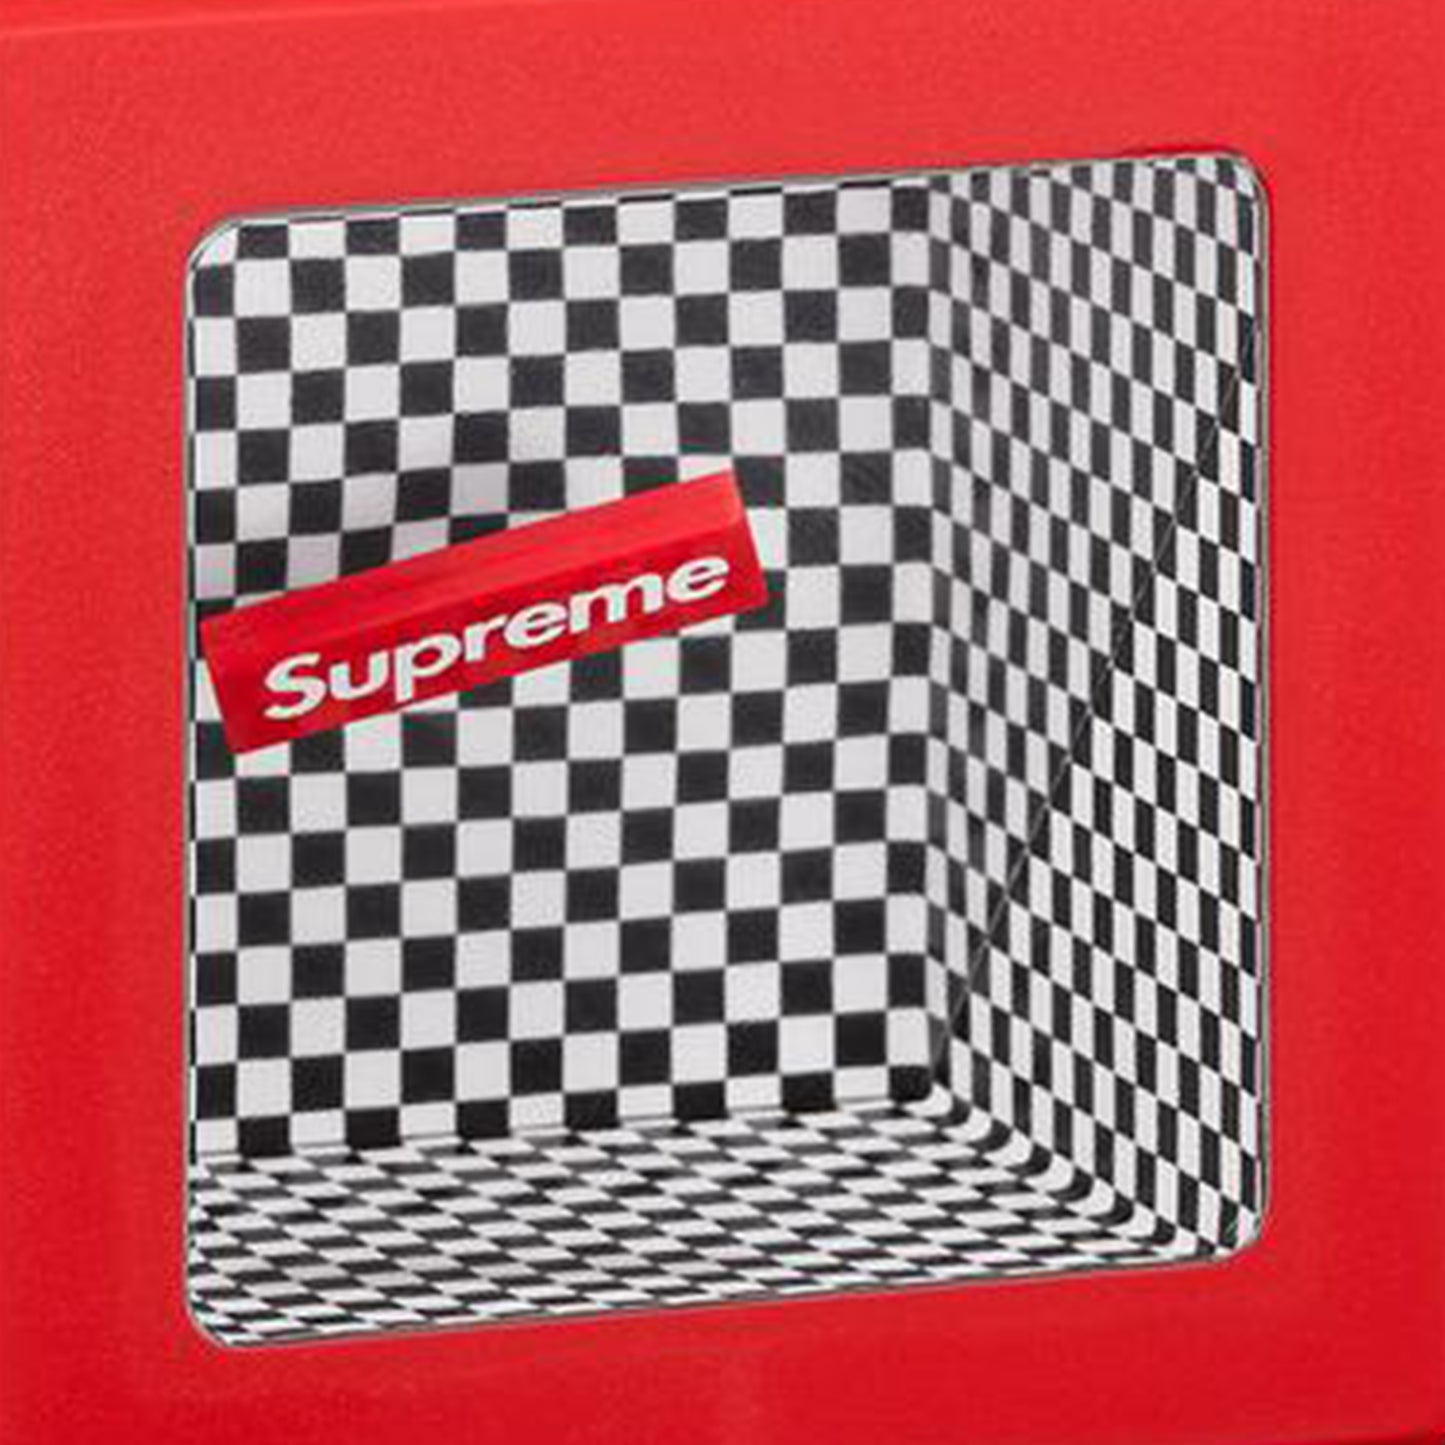 Supreme Illusion Coin Bank Red (SS18)